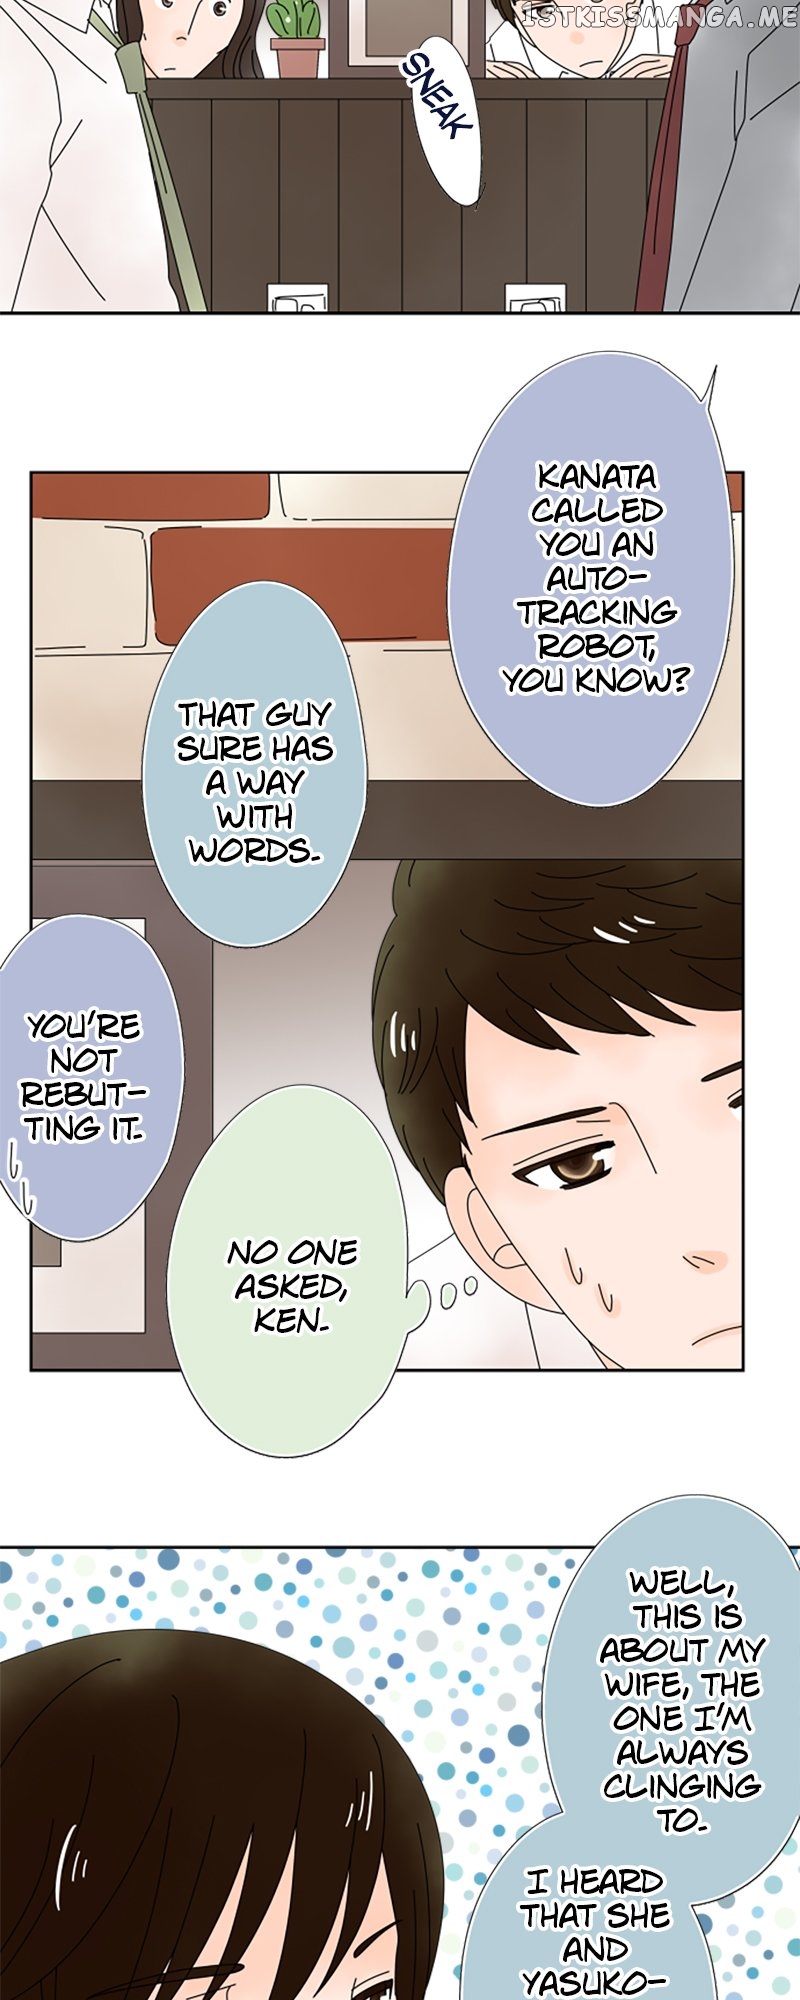 (Re)arranged Marriage Chapter 141 - page 2